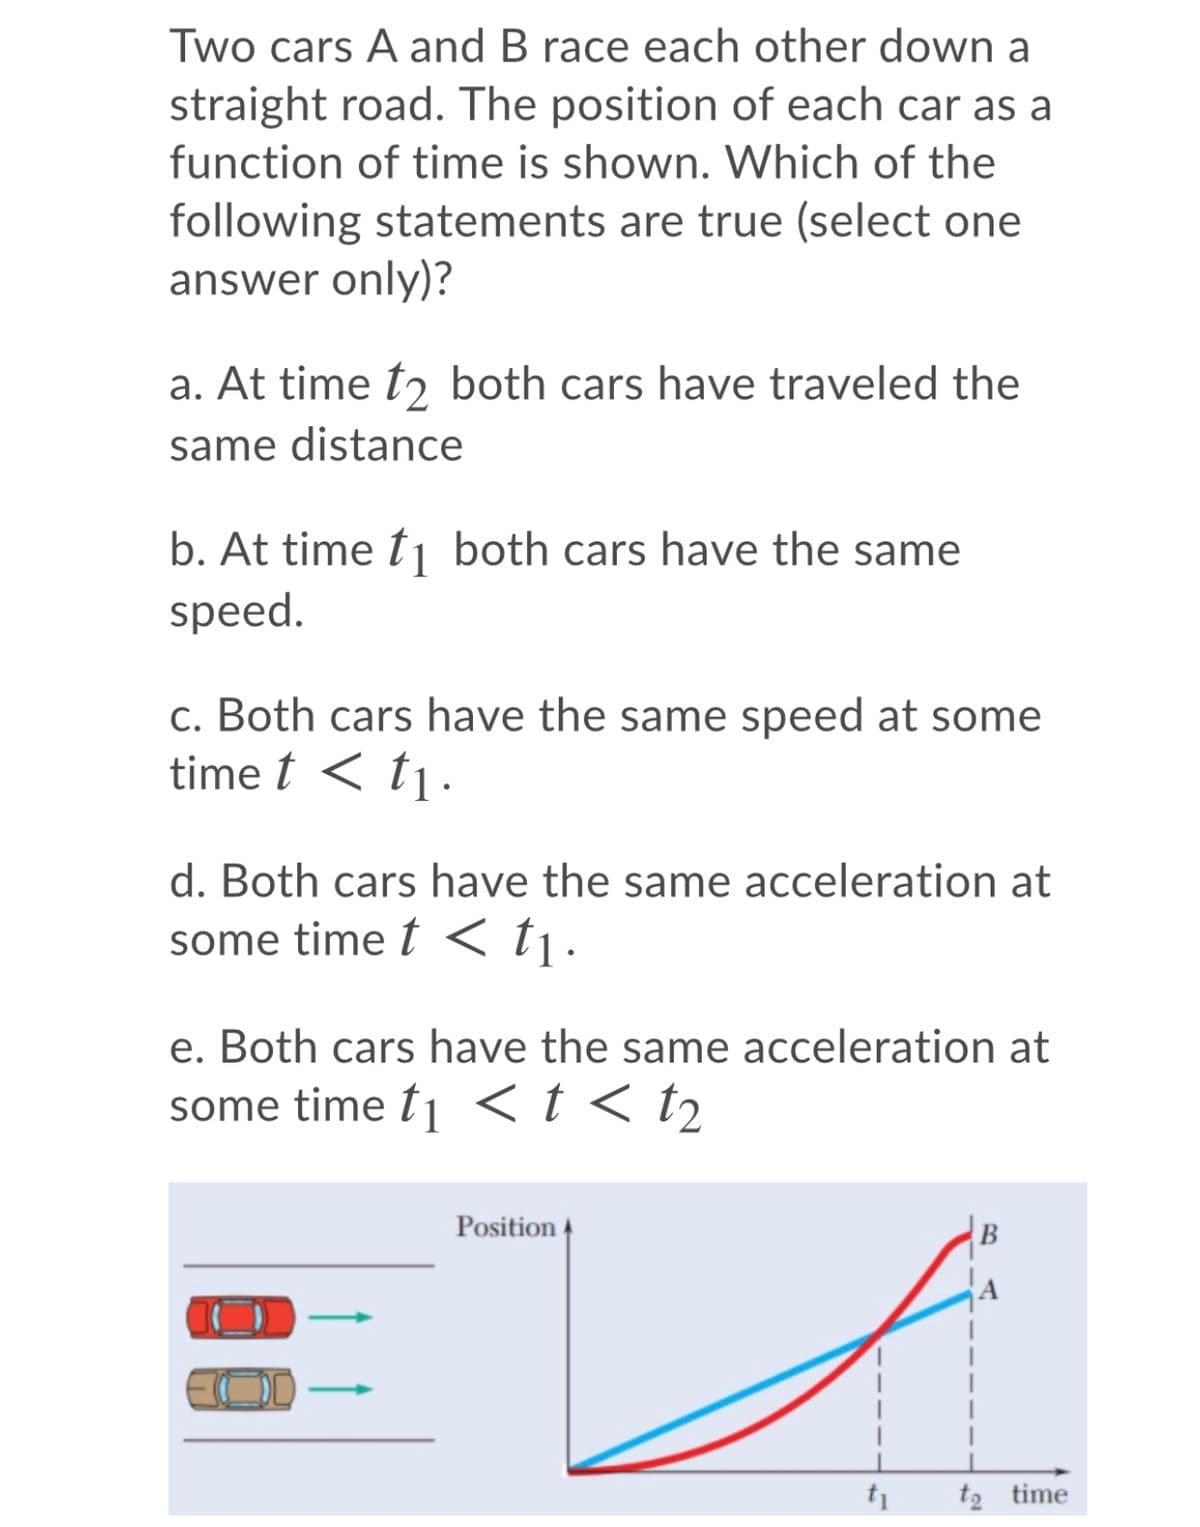 Two cars A and B race each other down a
straight road. The position of each car as a
function of time is shown. Which of the
following statements are true (select one
answer only)?
a. At time tɔ both cars have traveled the
same distance
b. At time t1 both cars have the same
speed.
c. Both cars have the same speed at some
time t < tj.
d. Both cars have the same acceleration at
some time t < tj.
e. Both cars have the same acceleration at
some time t1 <t < t2
Position
t2 time
